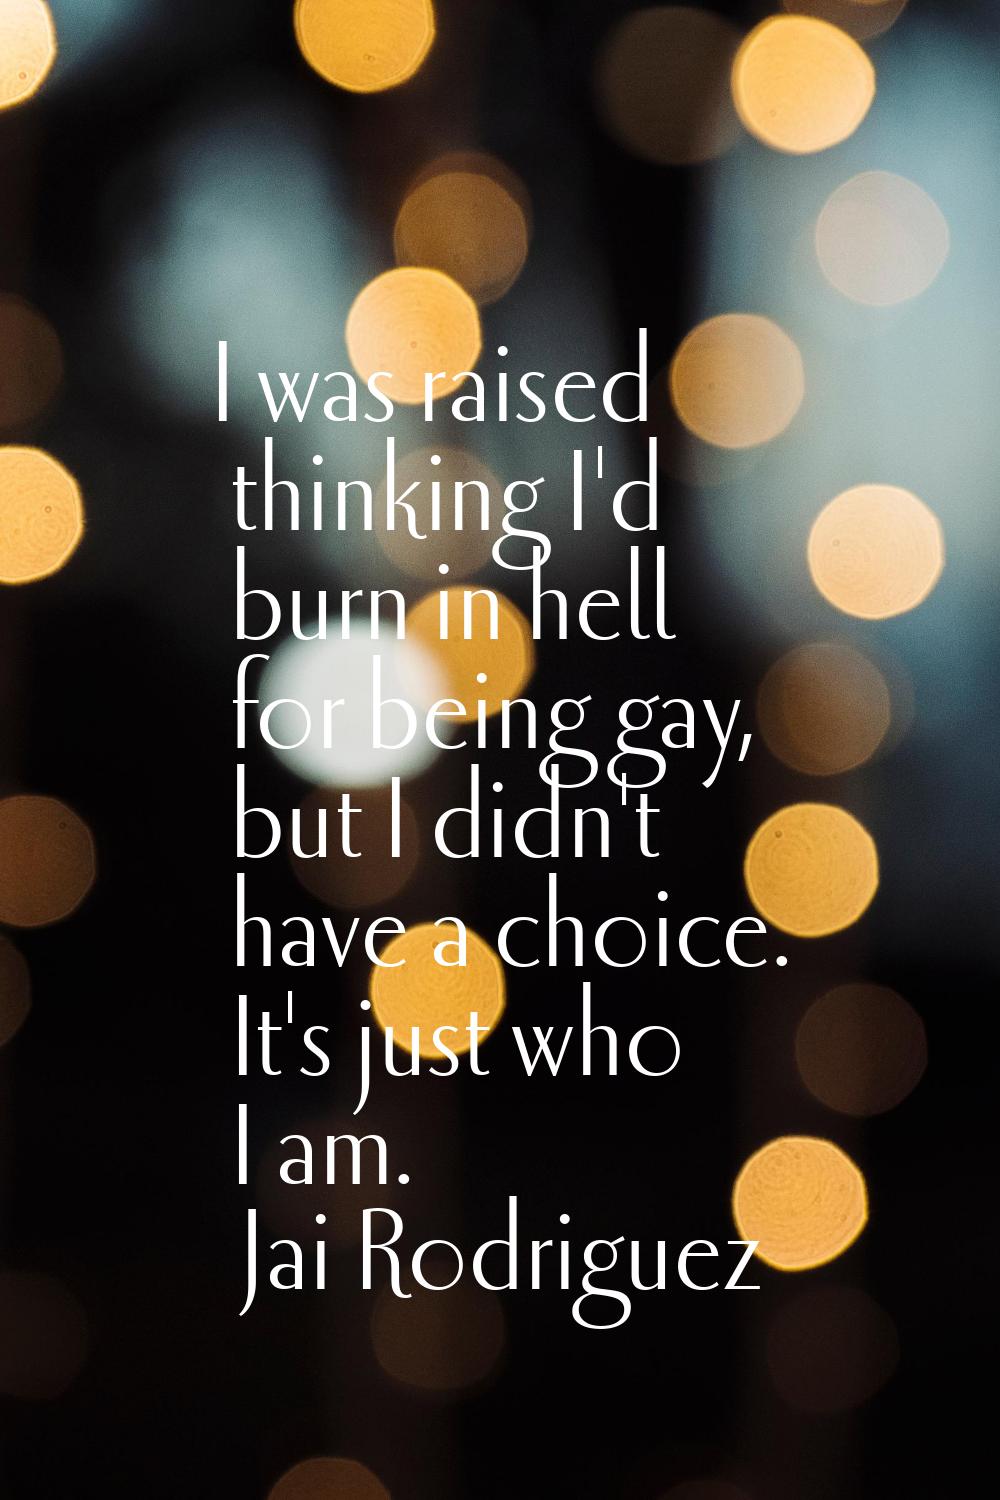 I was raised thinking I'd burn in hell for being gay, but I didn't have a choice. It's just who I a